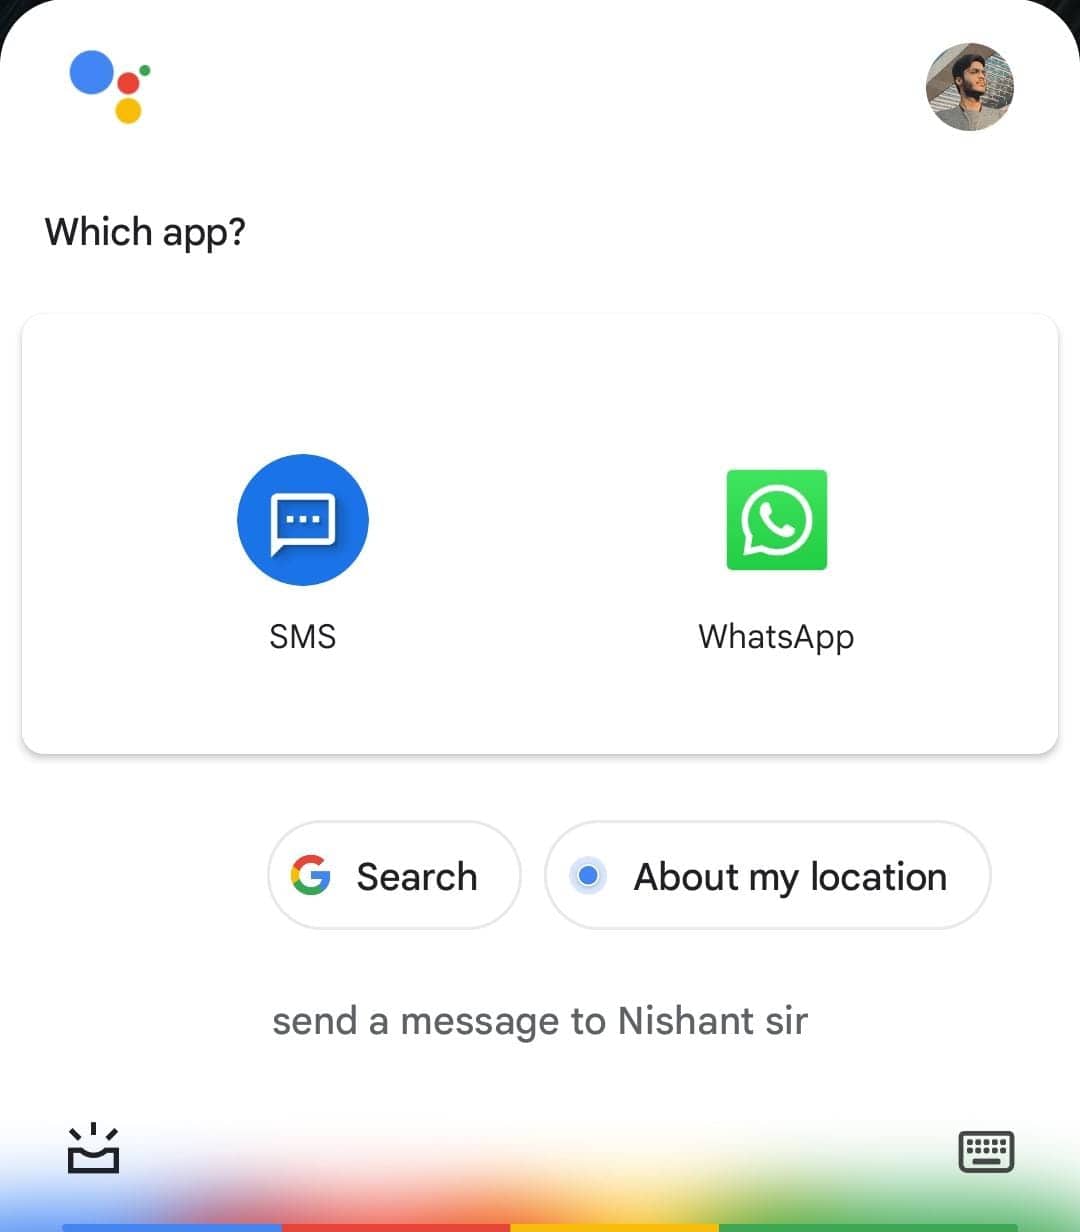 how to send whatsapp messages using google assistant, how to send whatsapp voice messages using google assistant, whatsapp tricks, google assistant tricks, send whatsapp messages using google assistant, how to send messages on whatsapp using google assistant